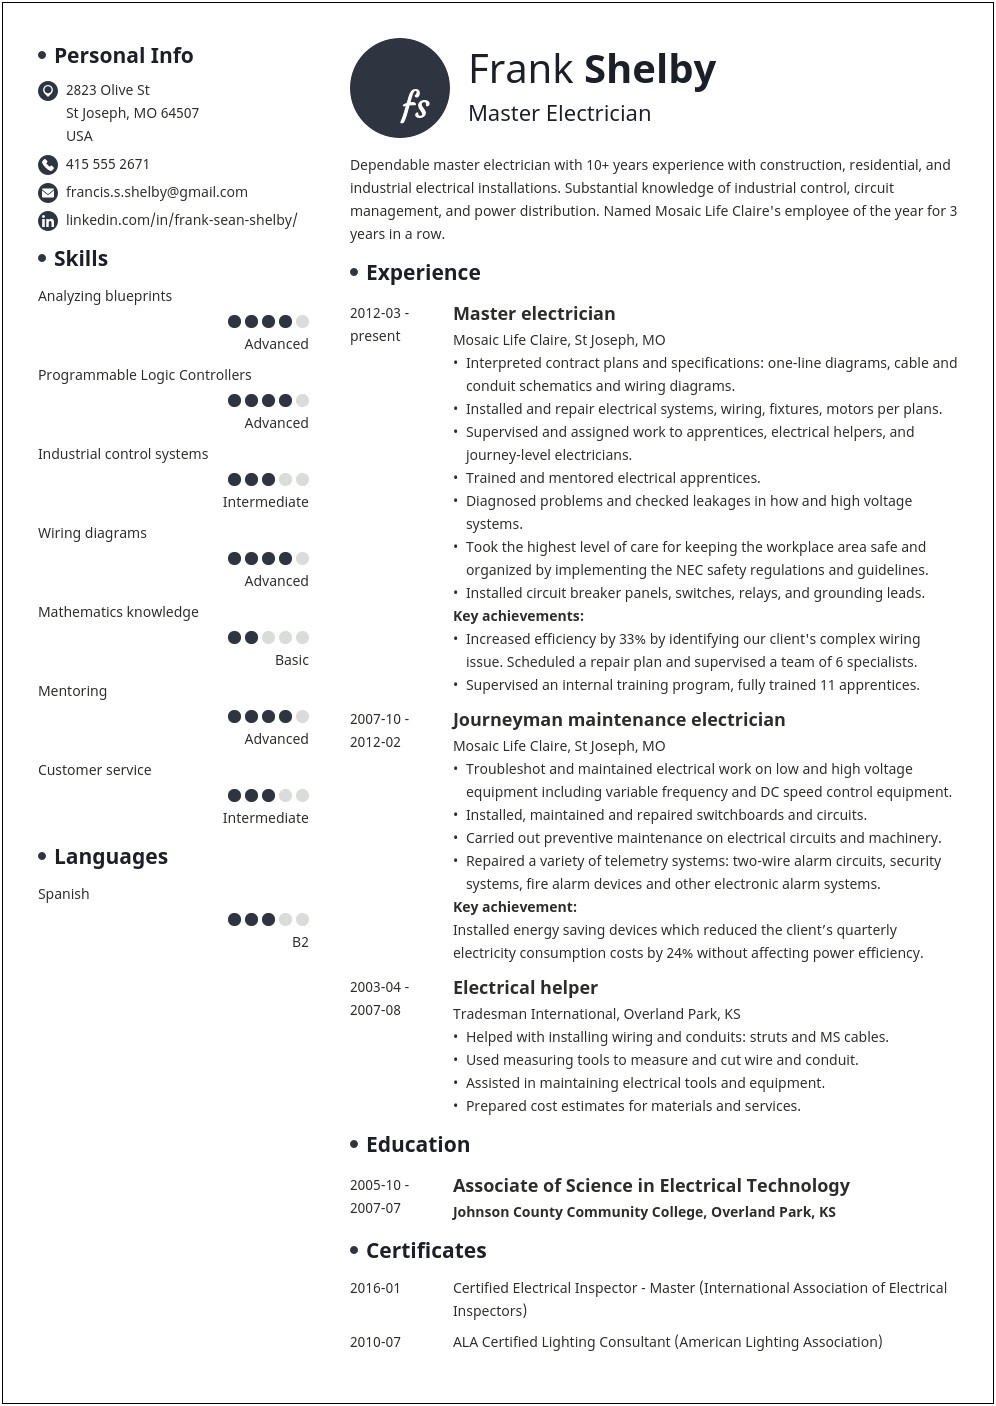 Resume Best Words To Use For Skills